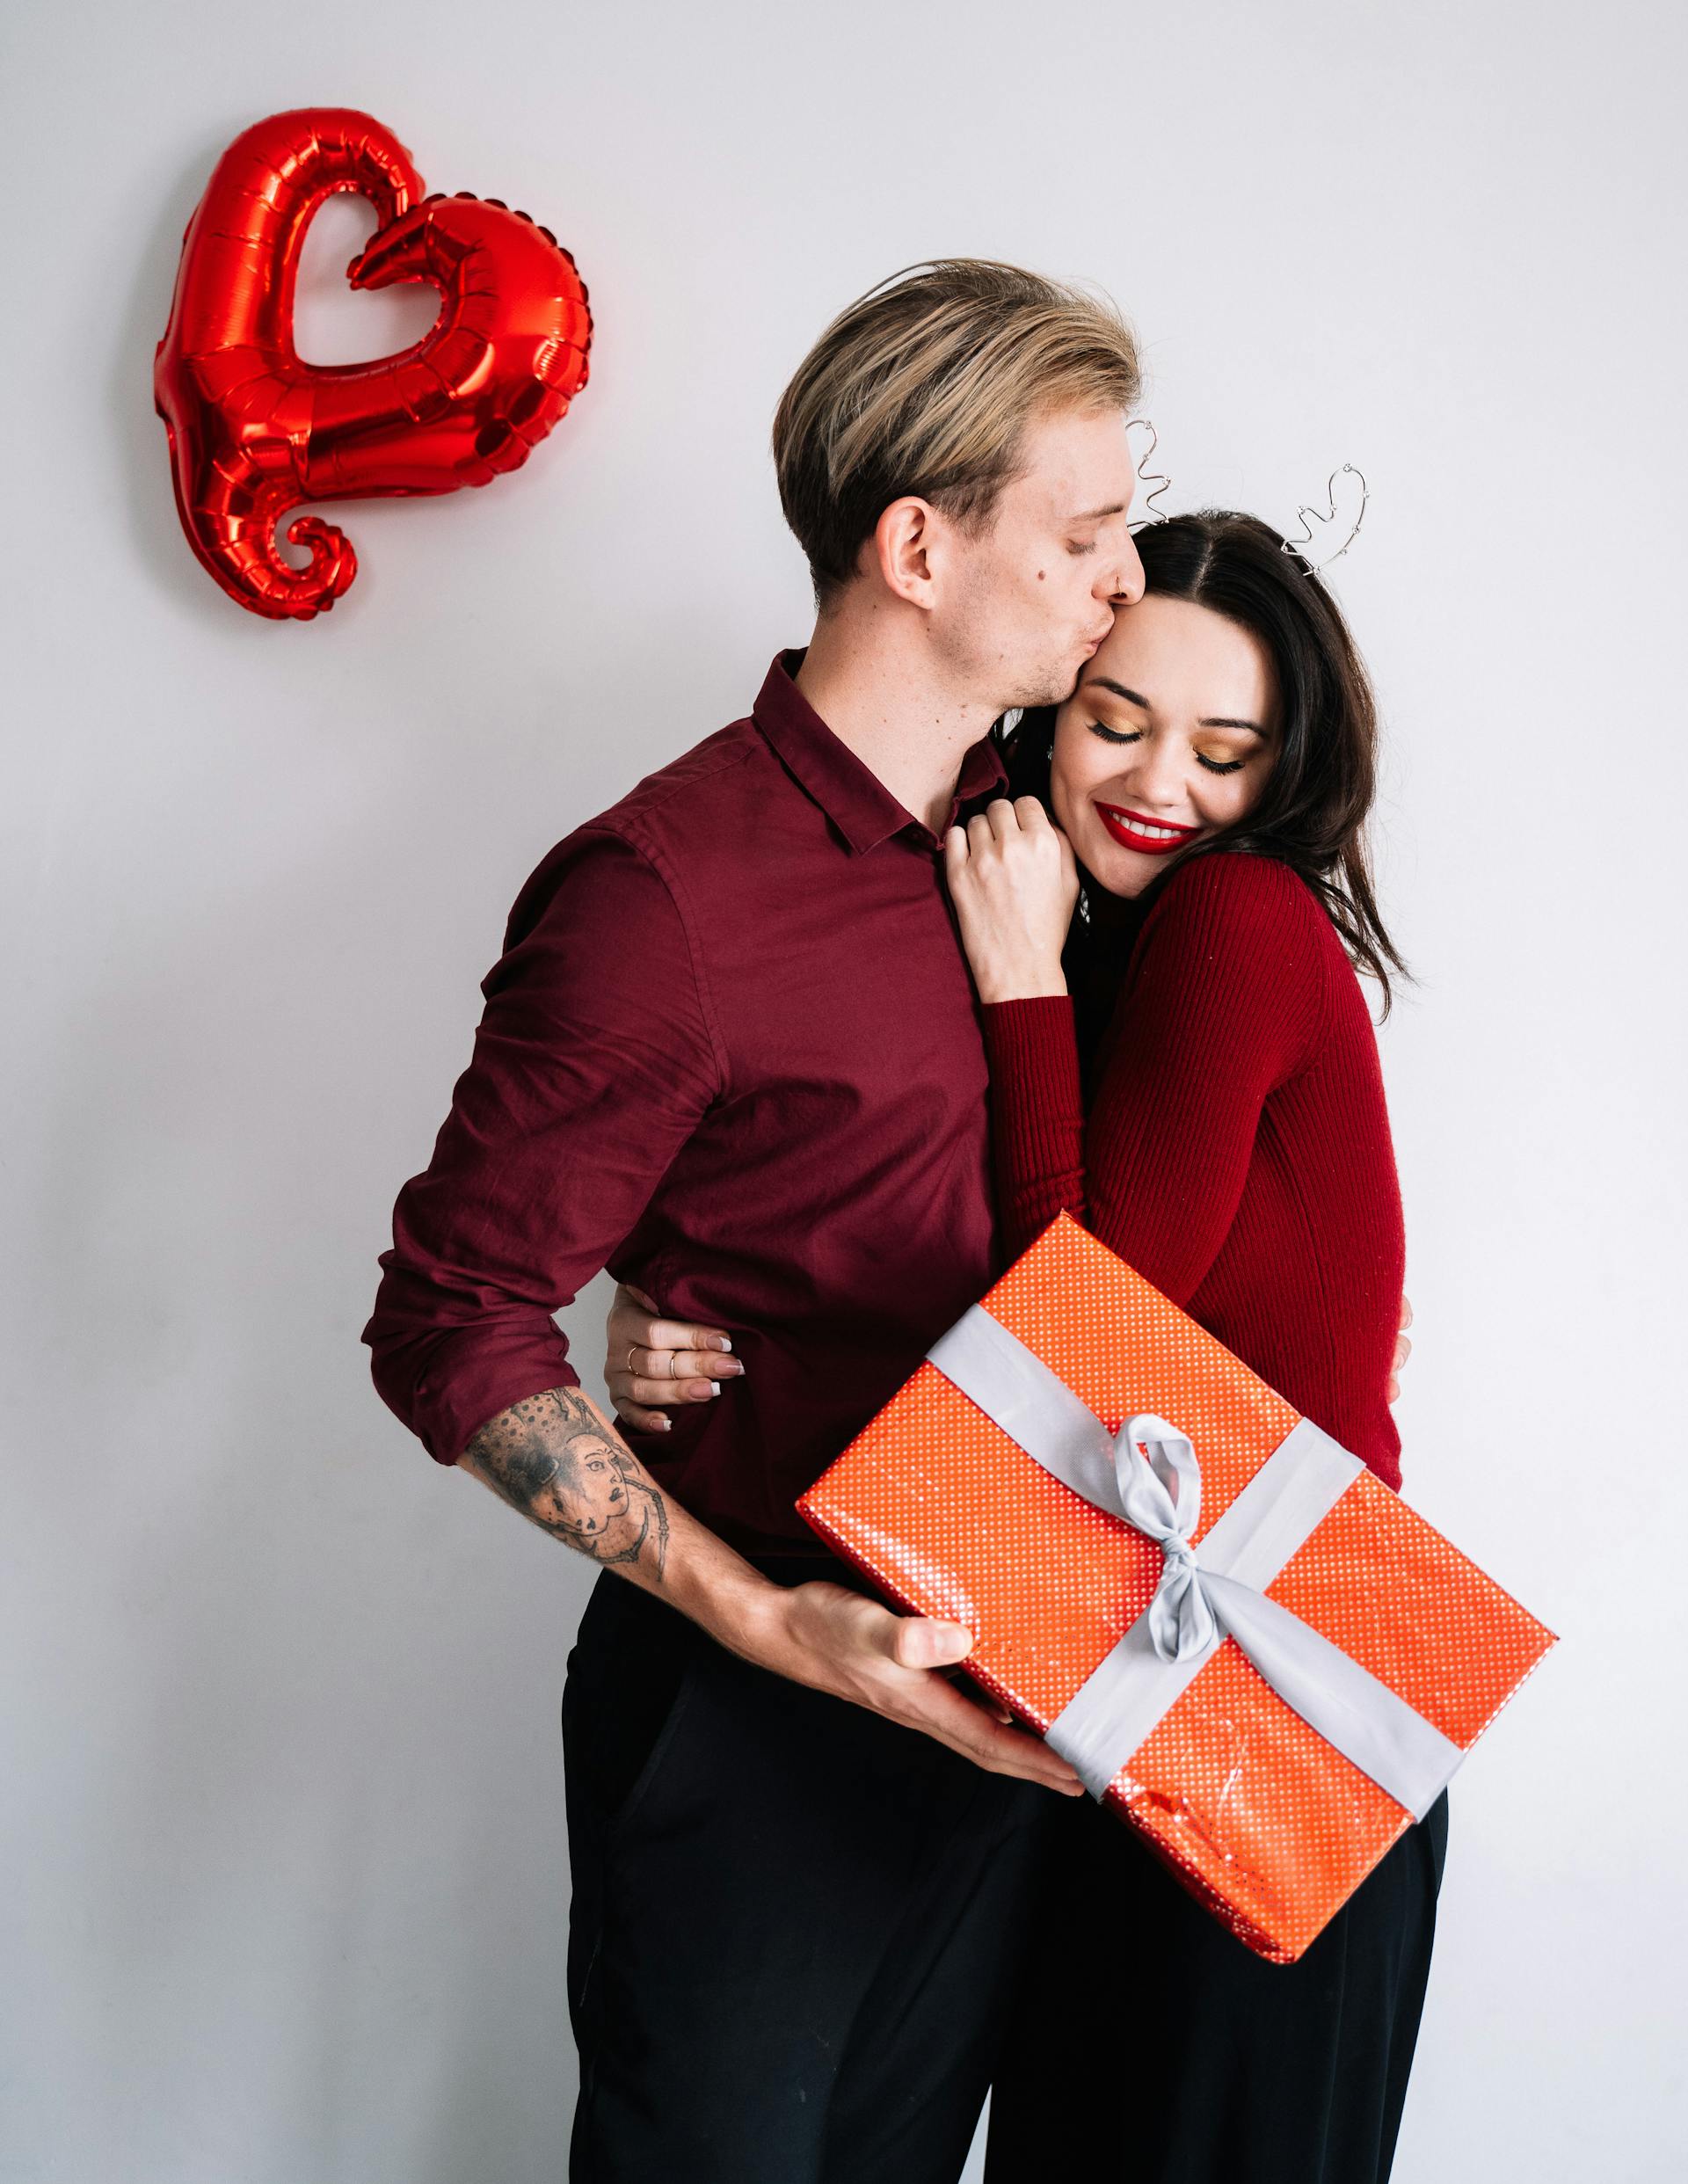 A man kissing a woman while holding a gift box | Source: Pexels